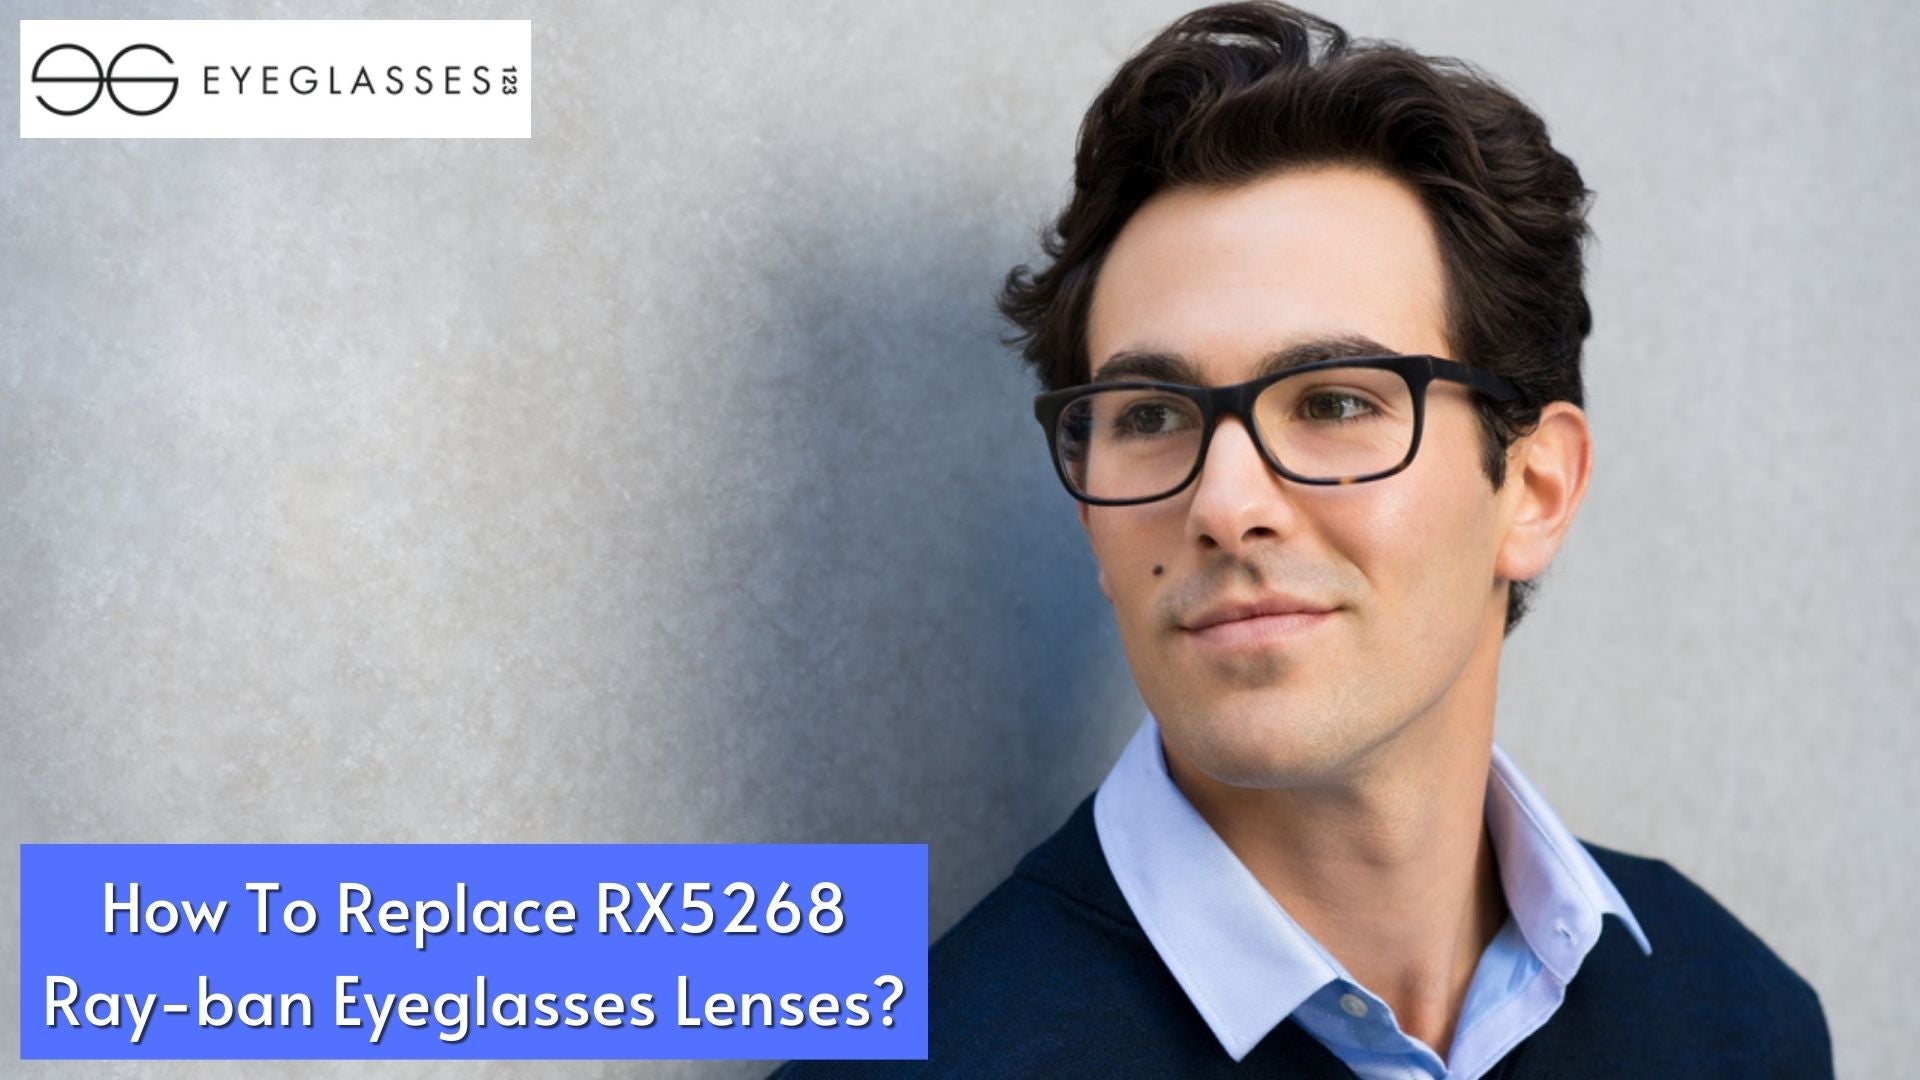 How To Replace RX5268 Ray-ban Eyeglasses Lenses?